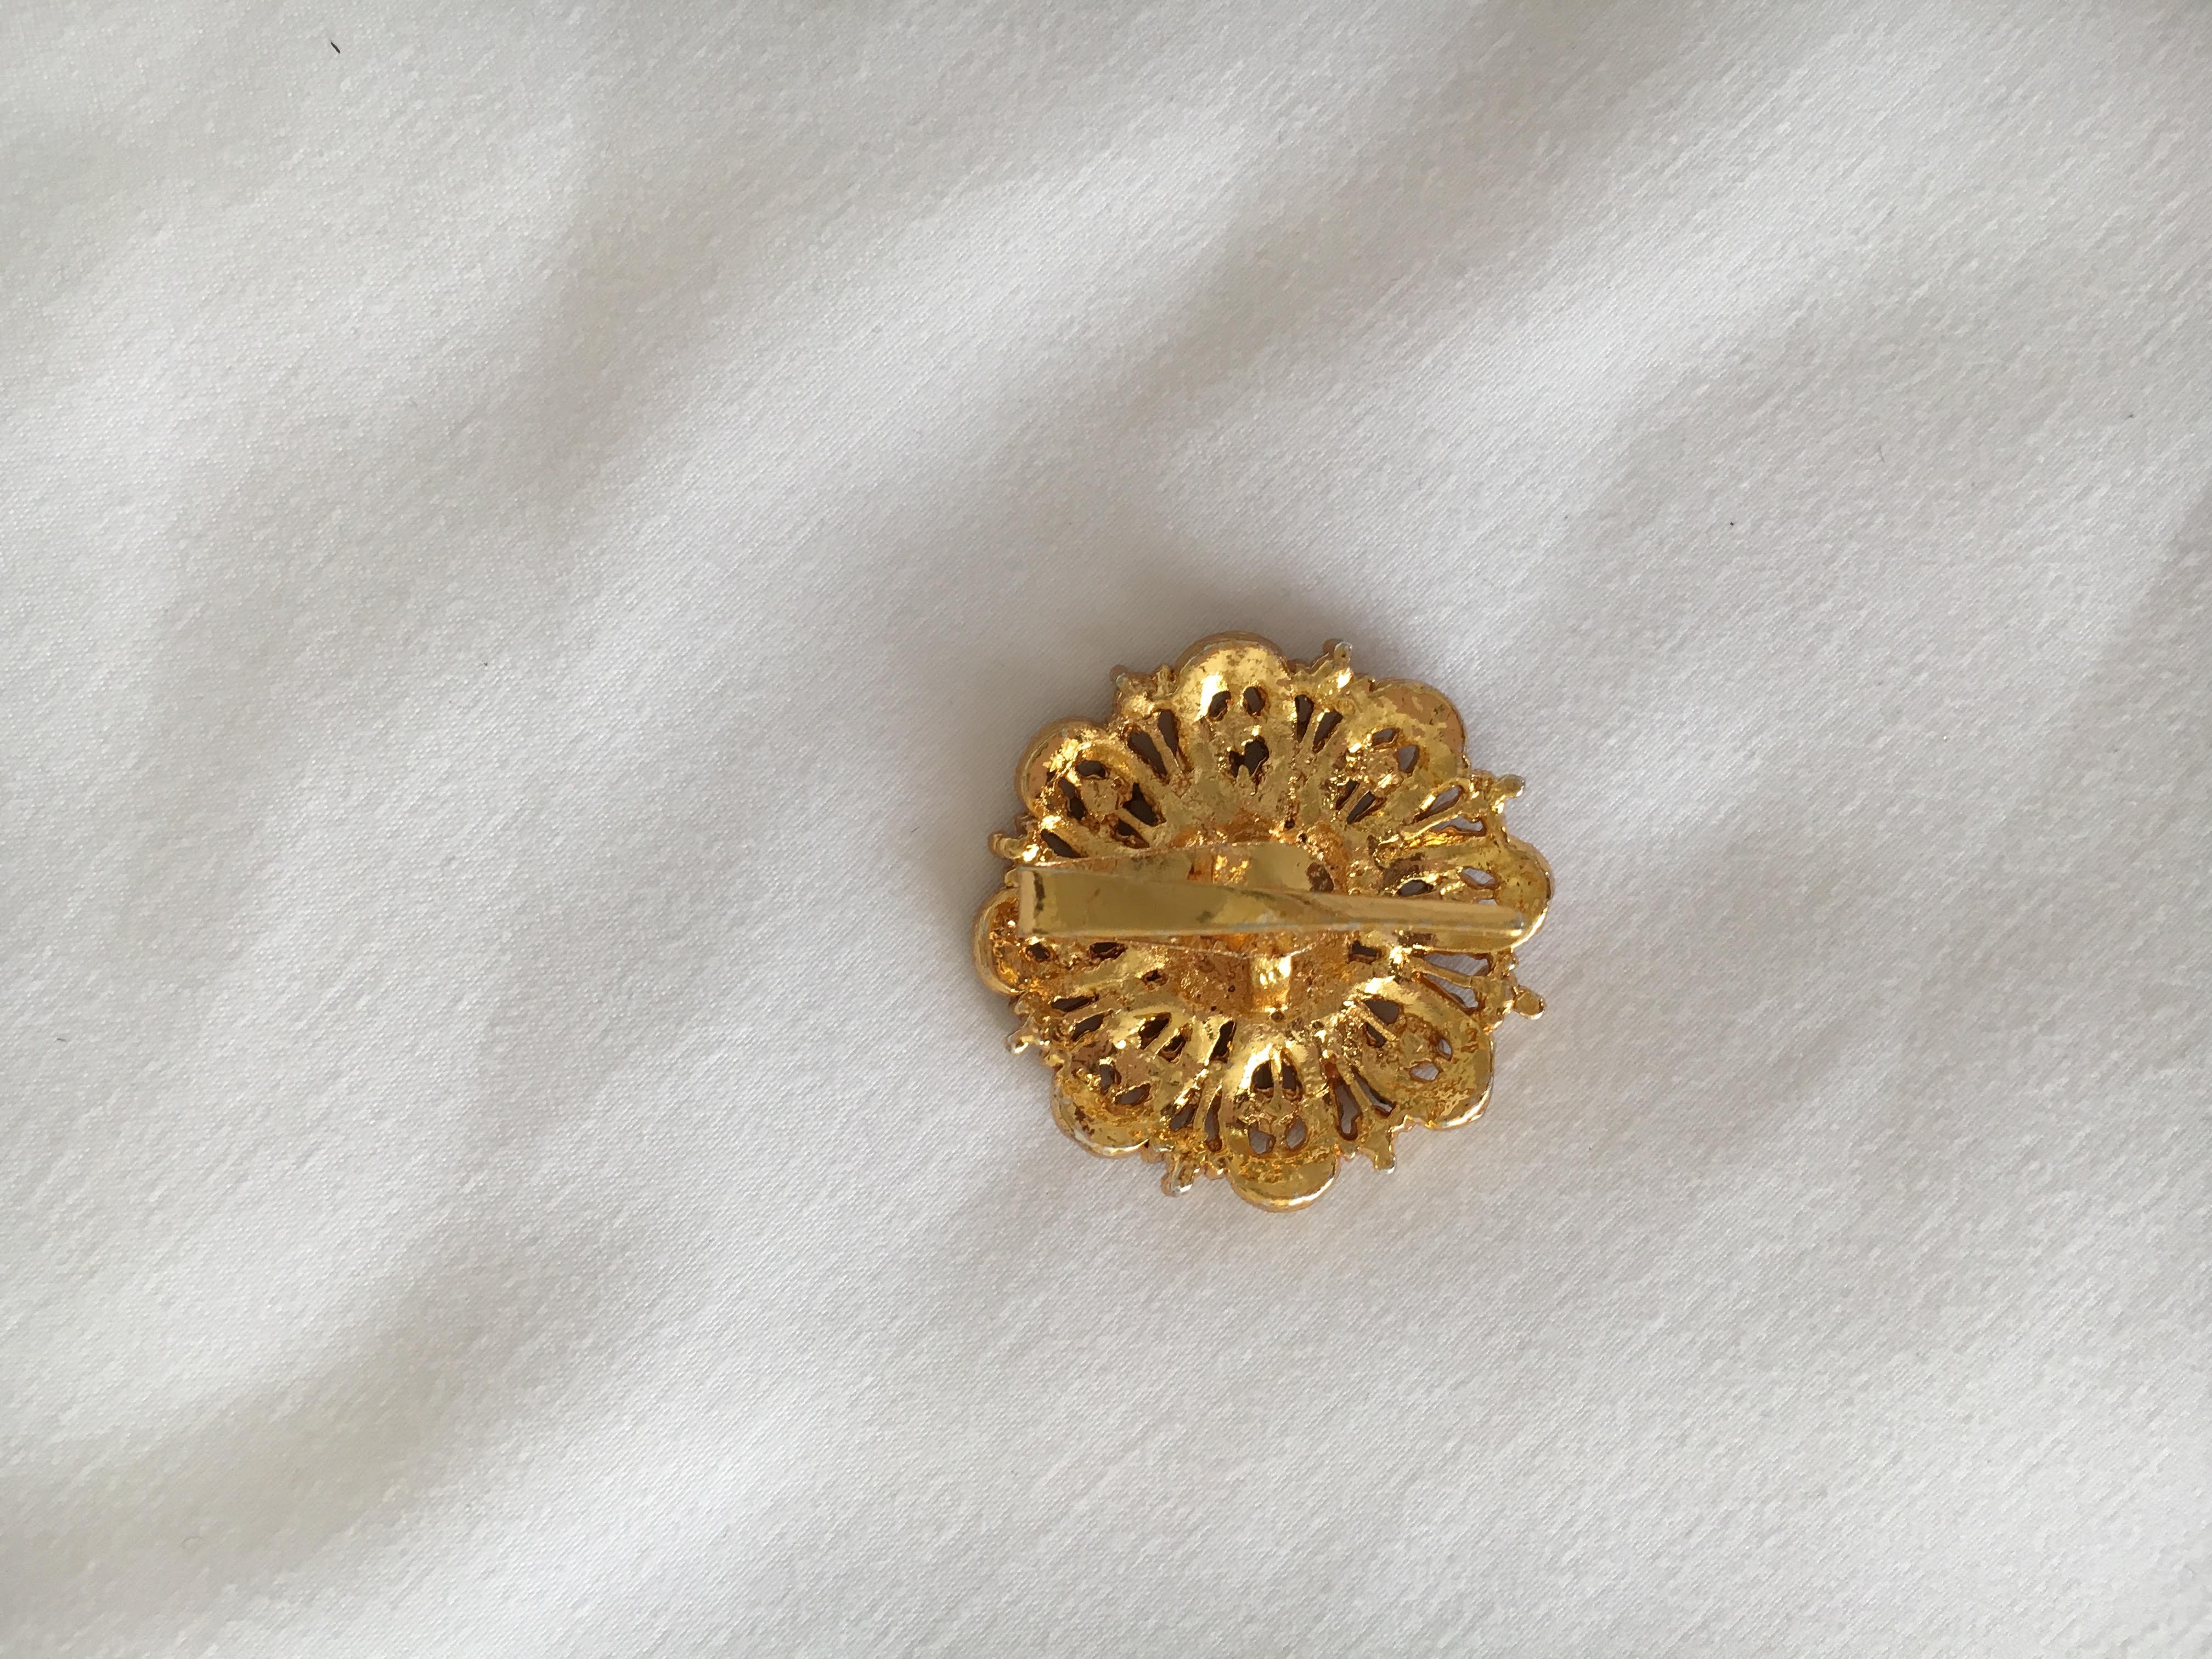 Gold Plated - Temple Jewelry - Hair Clip - Jewel Stone Studded